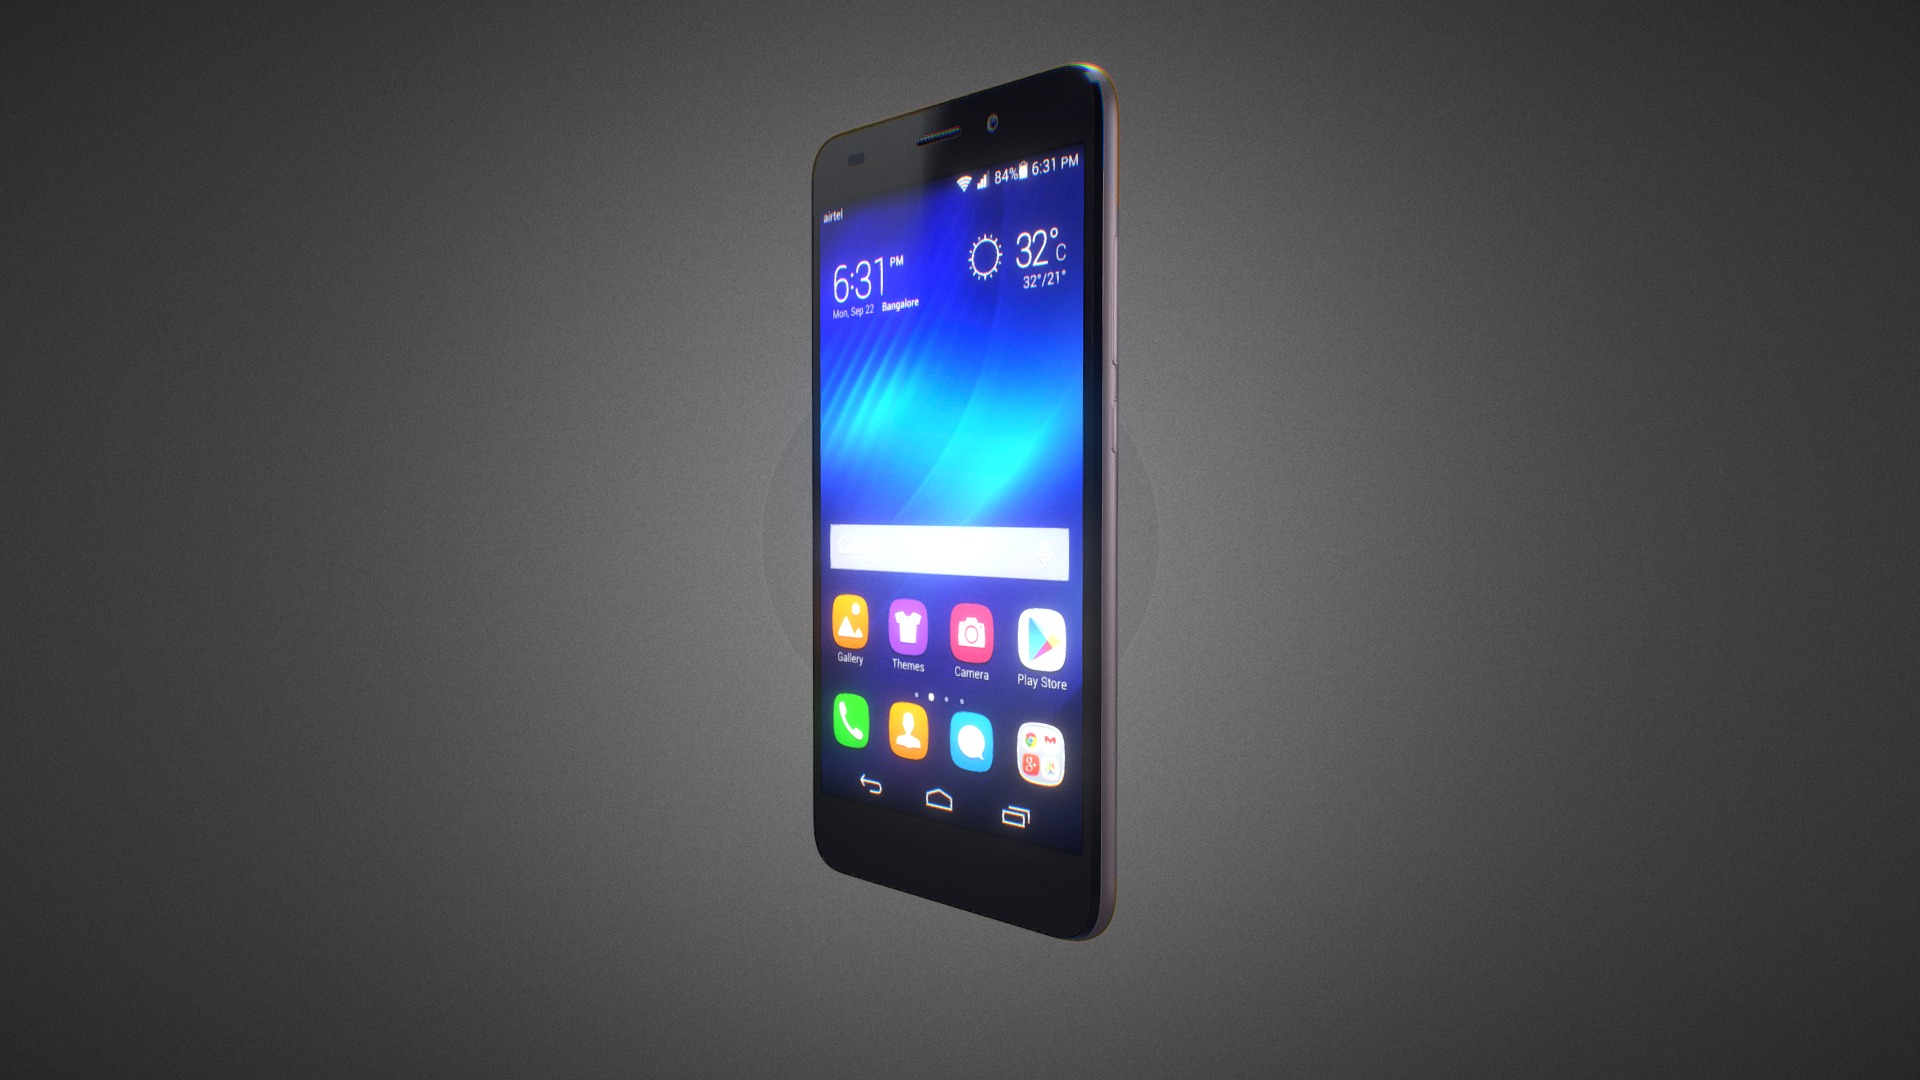 3D model Huawei Honor 5C for Element 3D - This is a 3D model of the Huawei Honor 5C for Element 3D. The 3D model is about a black smartphone with a blue screen.